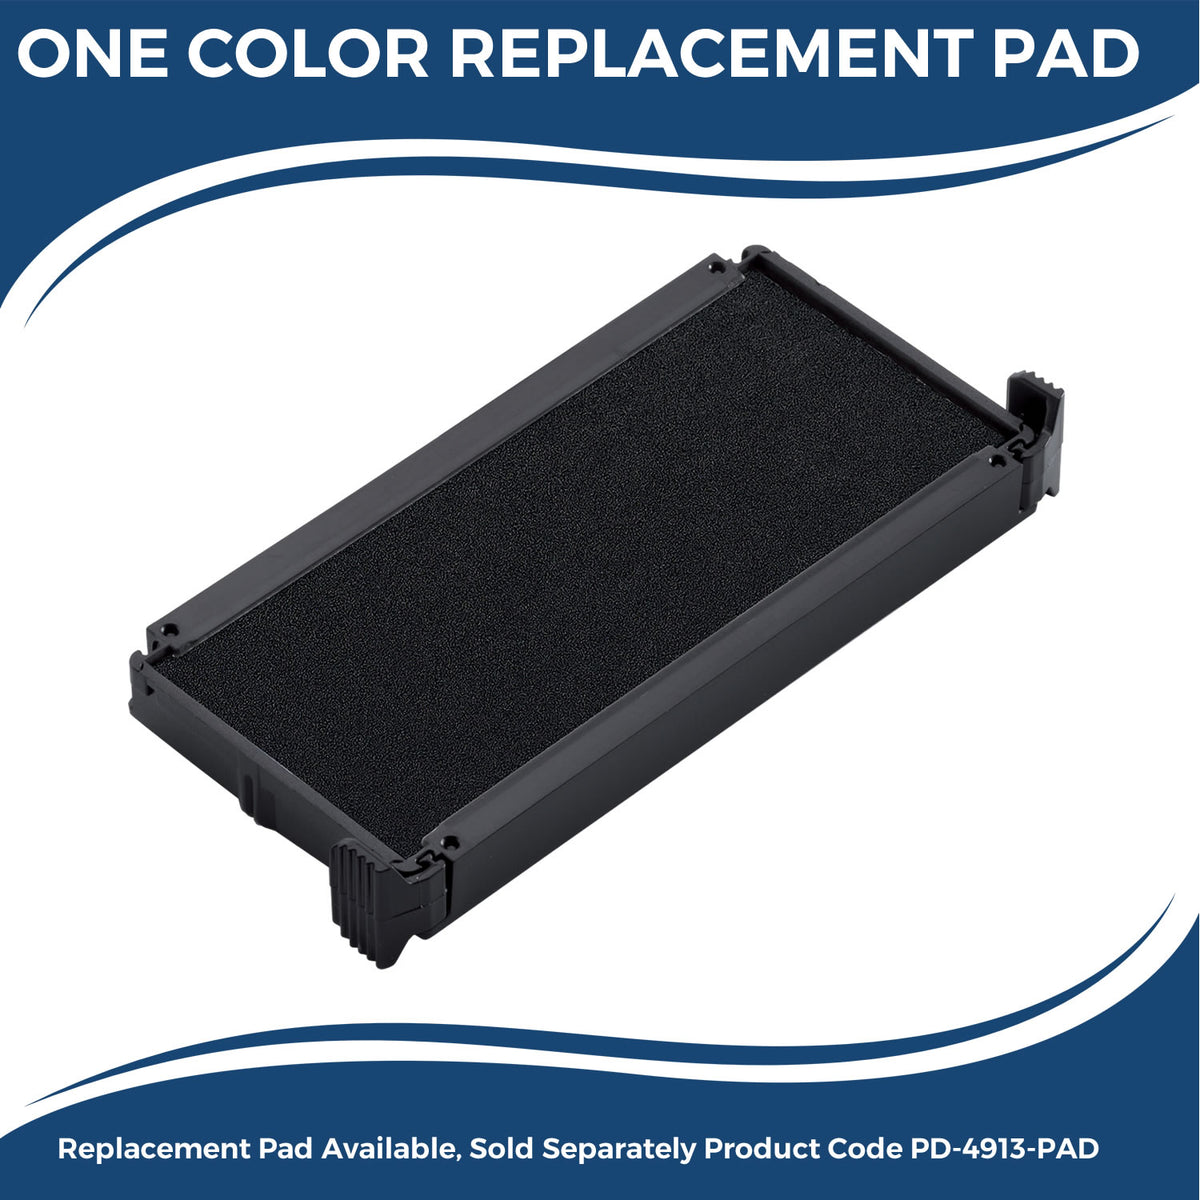 Large Self-Inking Classified Stamp 4888S Large Replacment Pad